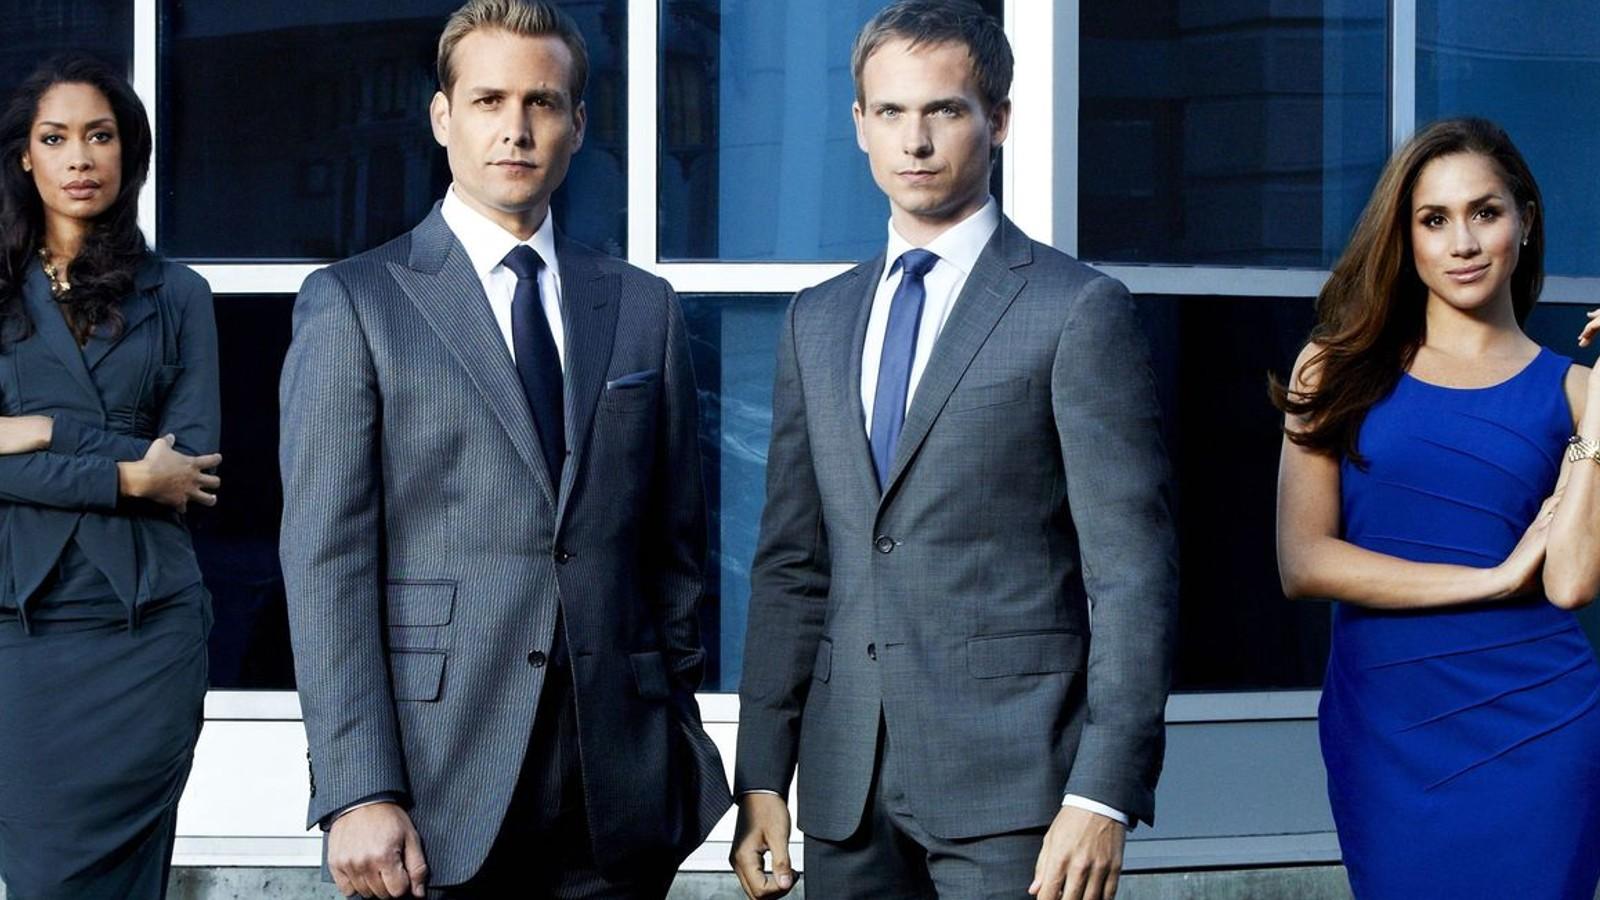 The lawyers at the center of Suits.